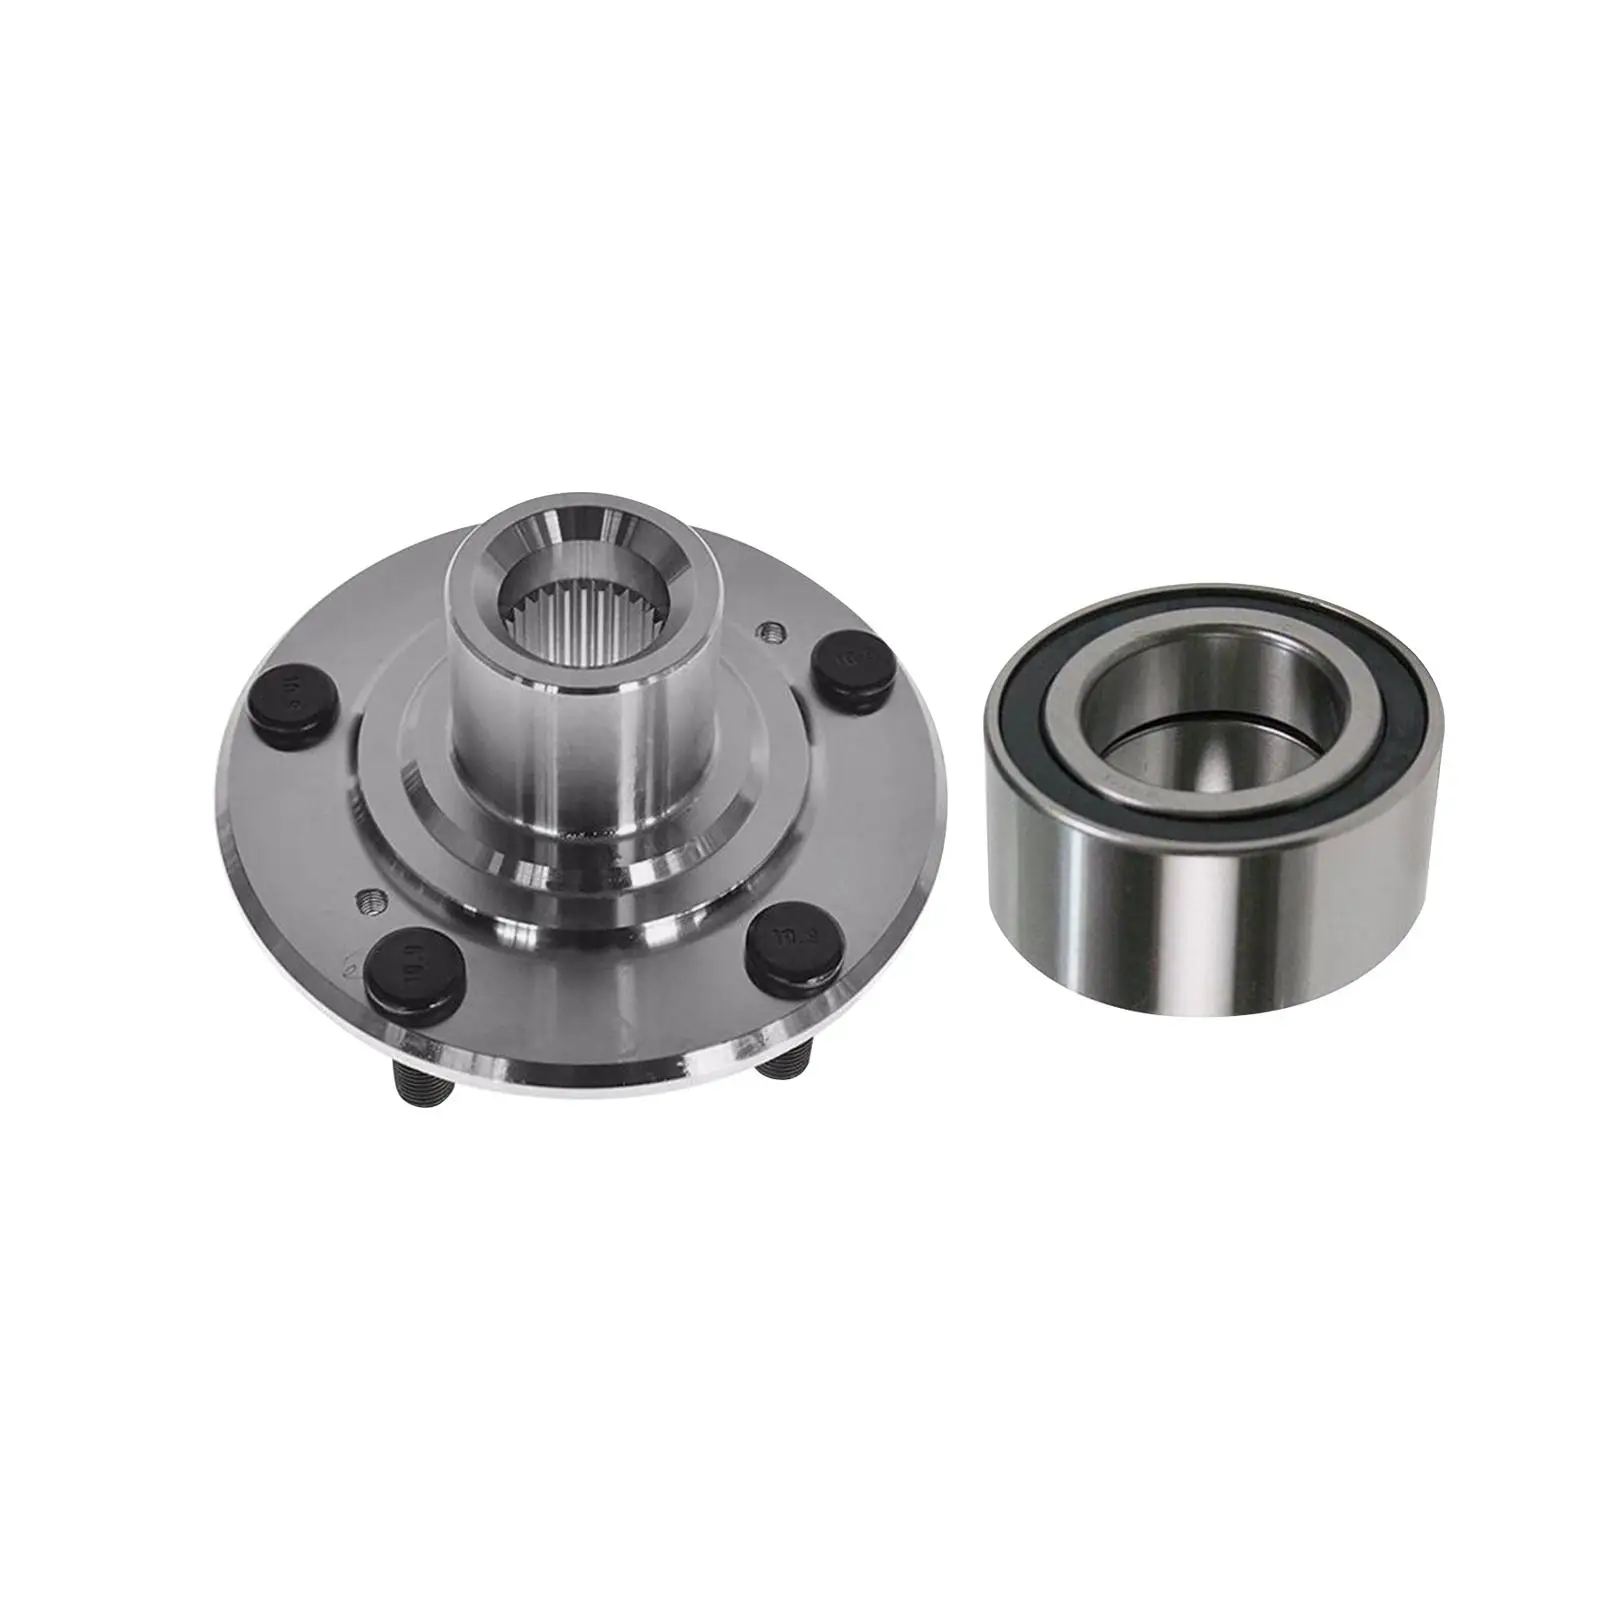 Front Wheel Hub Bearing Set WH188 Nt510110 Accessories Easy Installation Professional Replacement for Lincoln Mkc 2015-2019